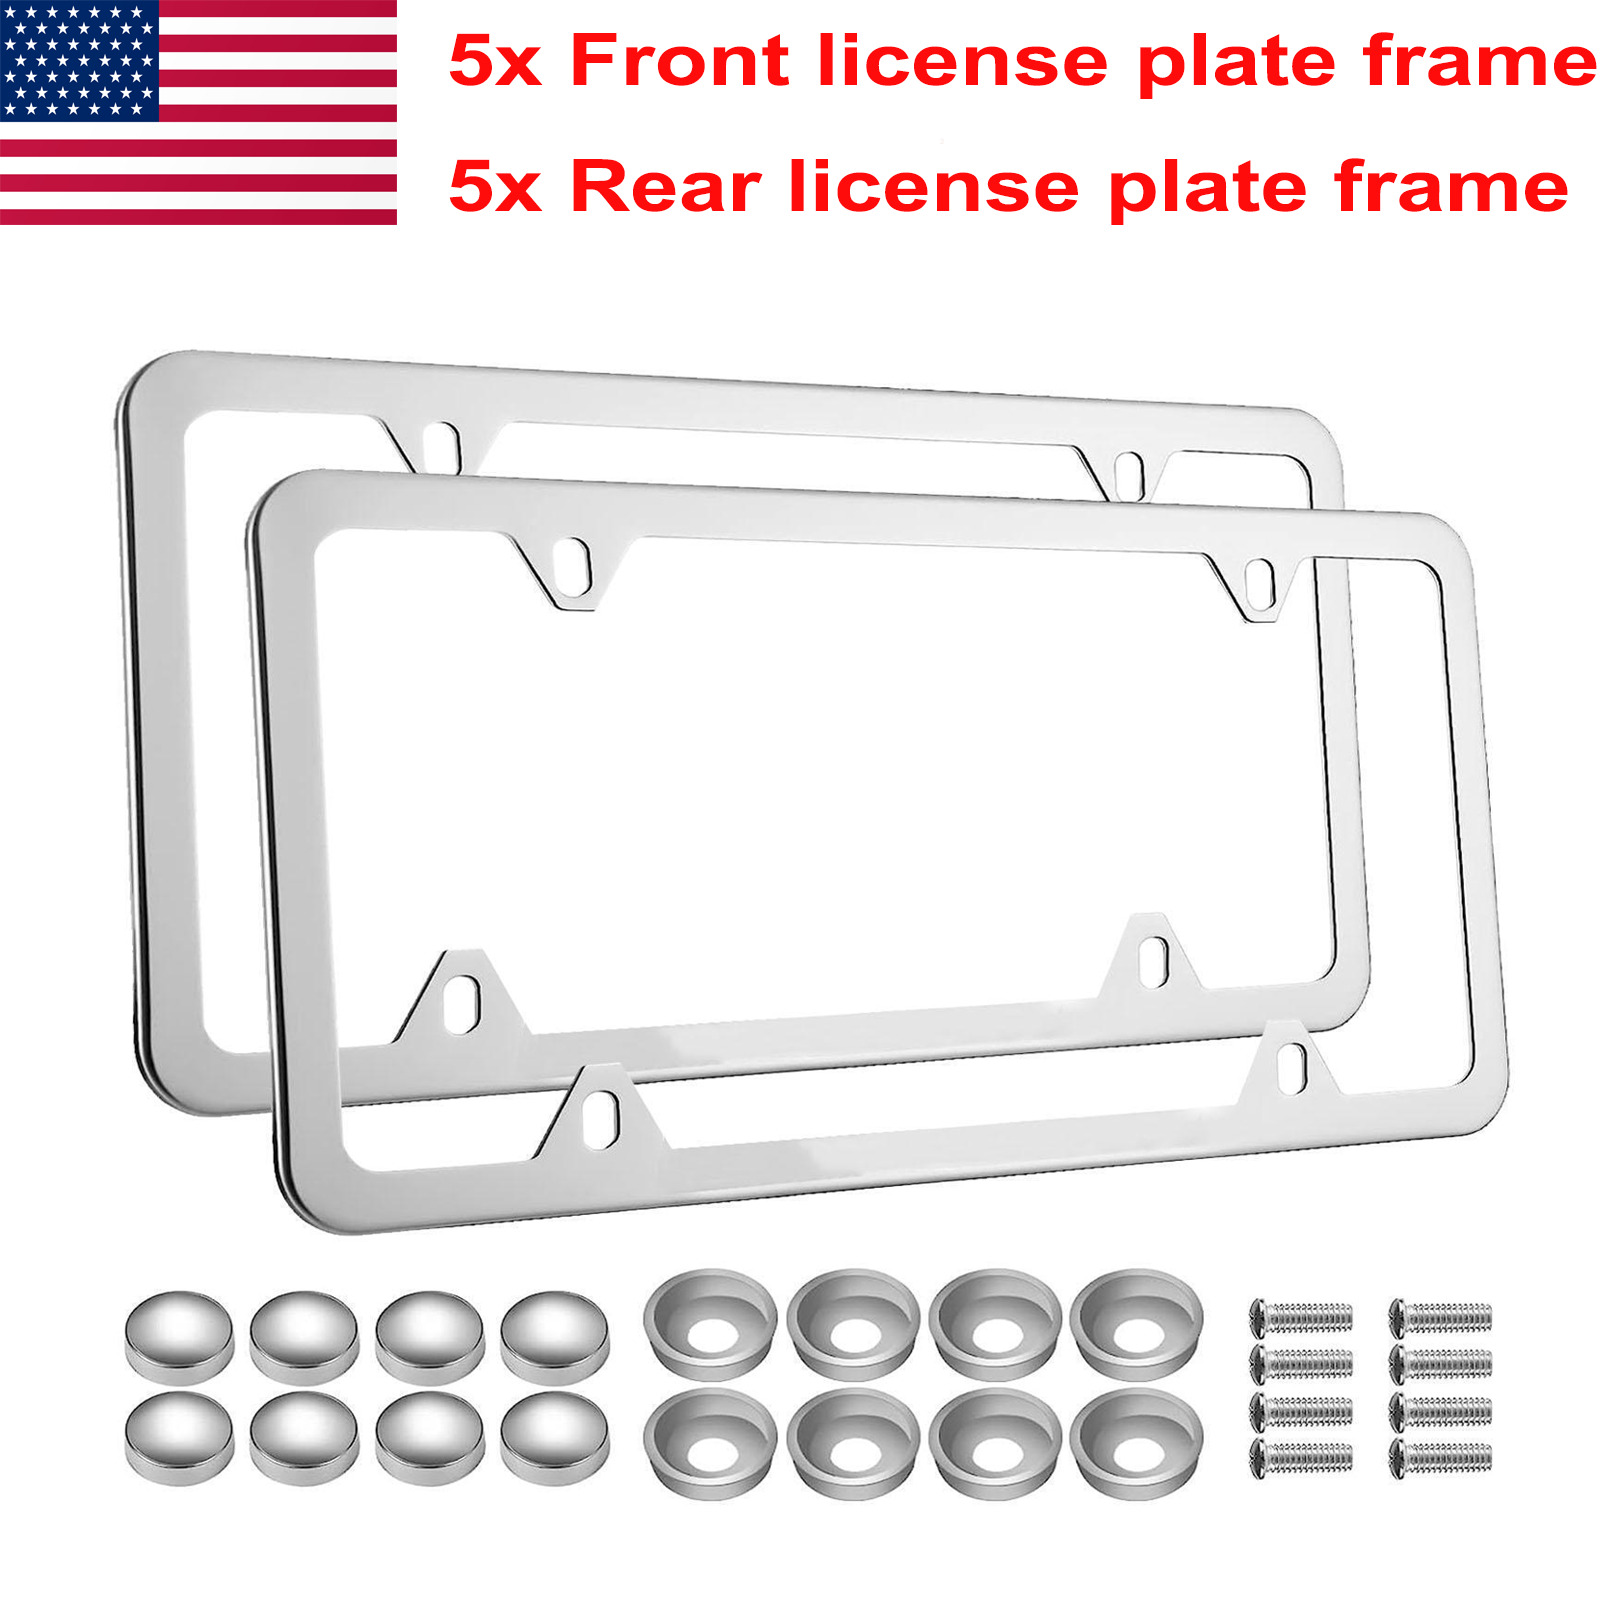 10Pcs Chrome Stainless Steel Metal License Plate Frame Tag Cover With Screw Caps